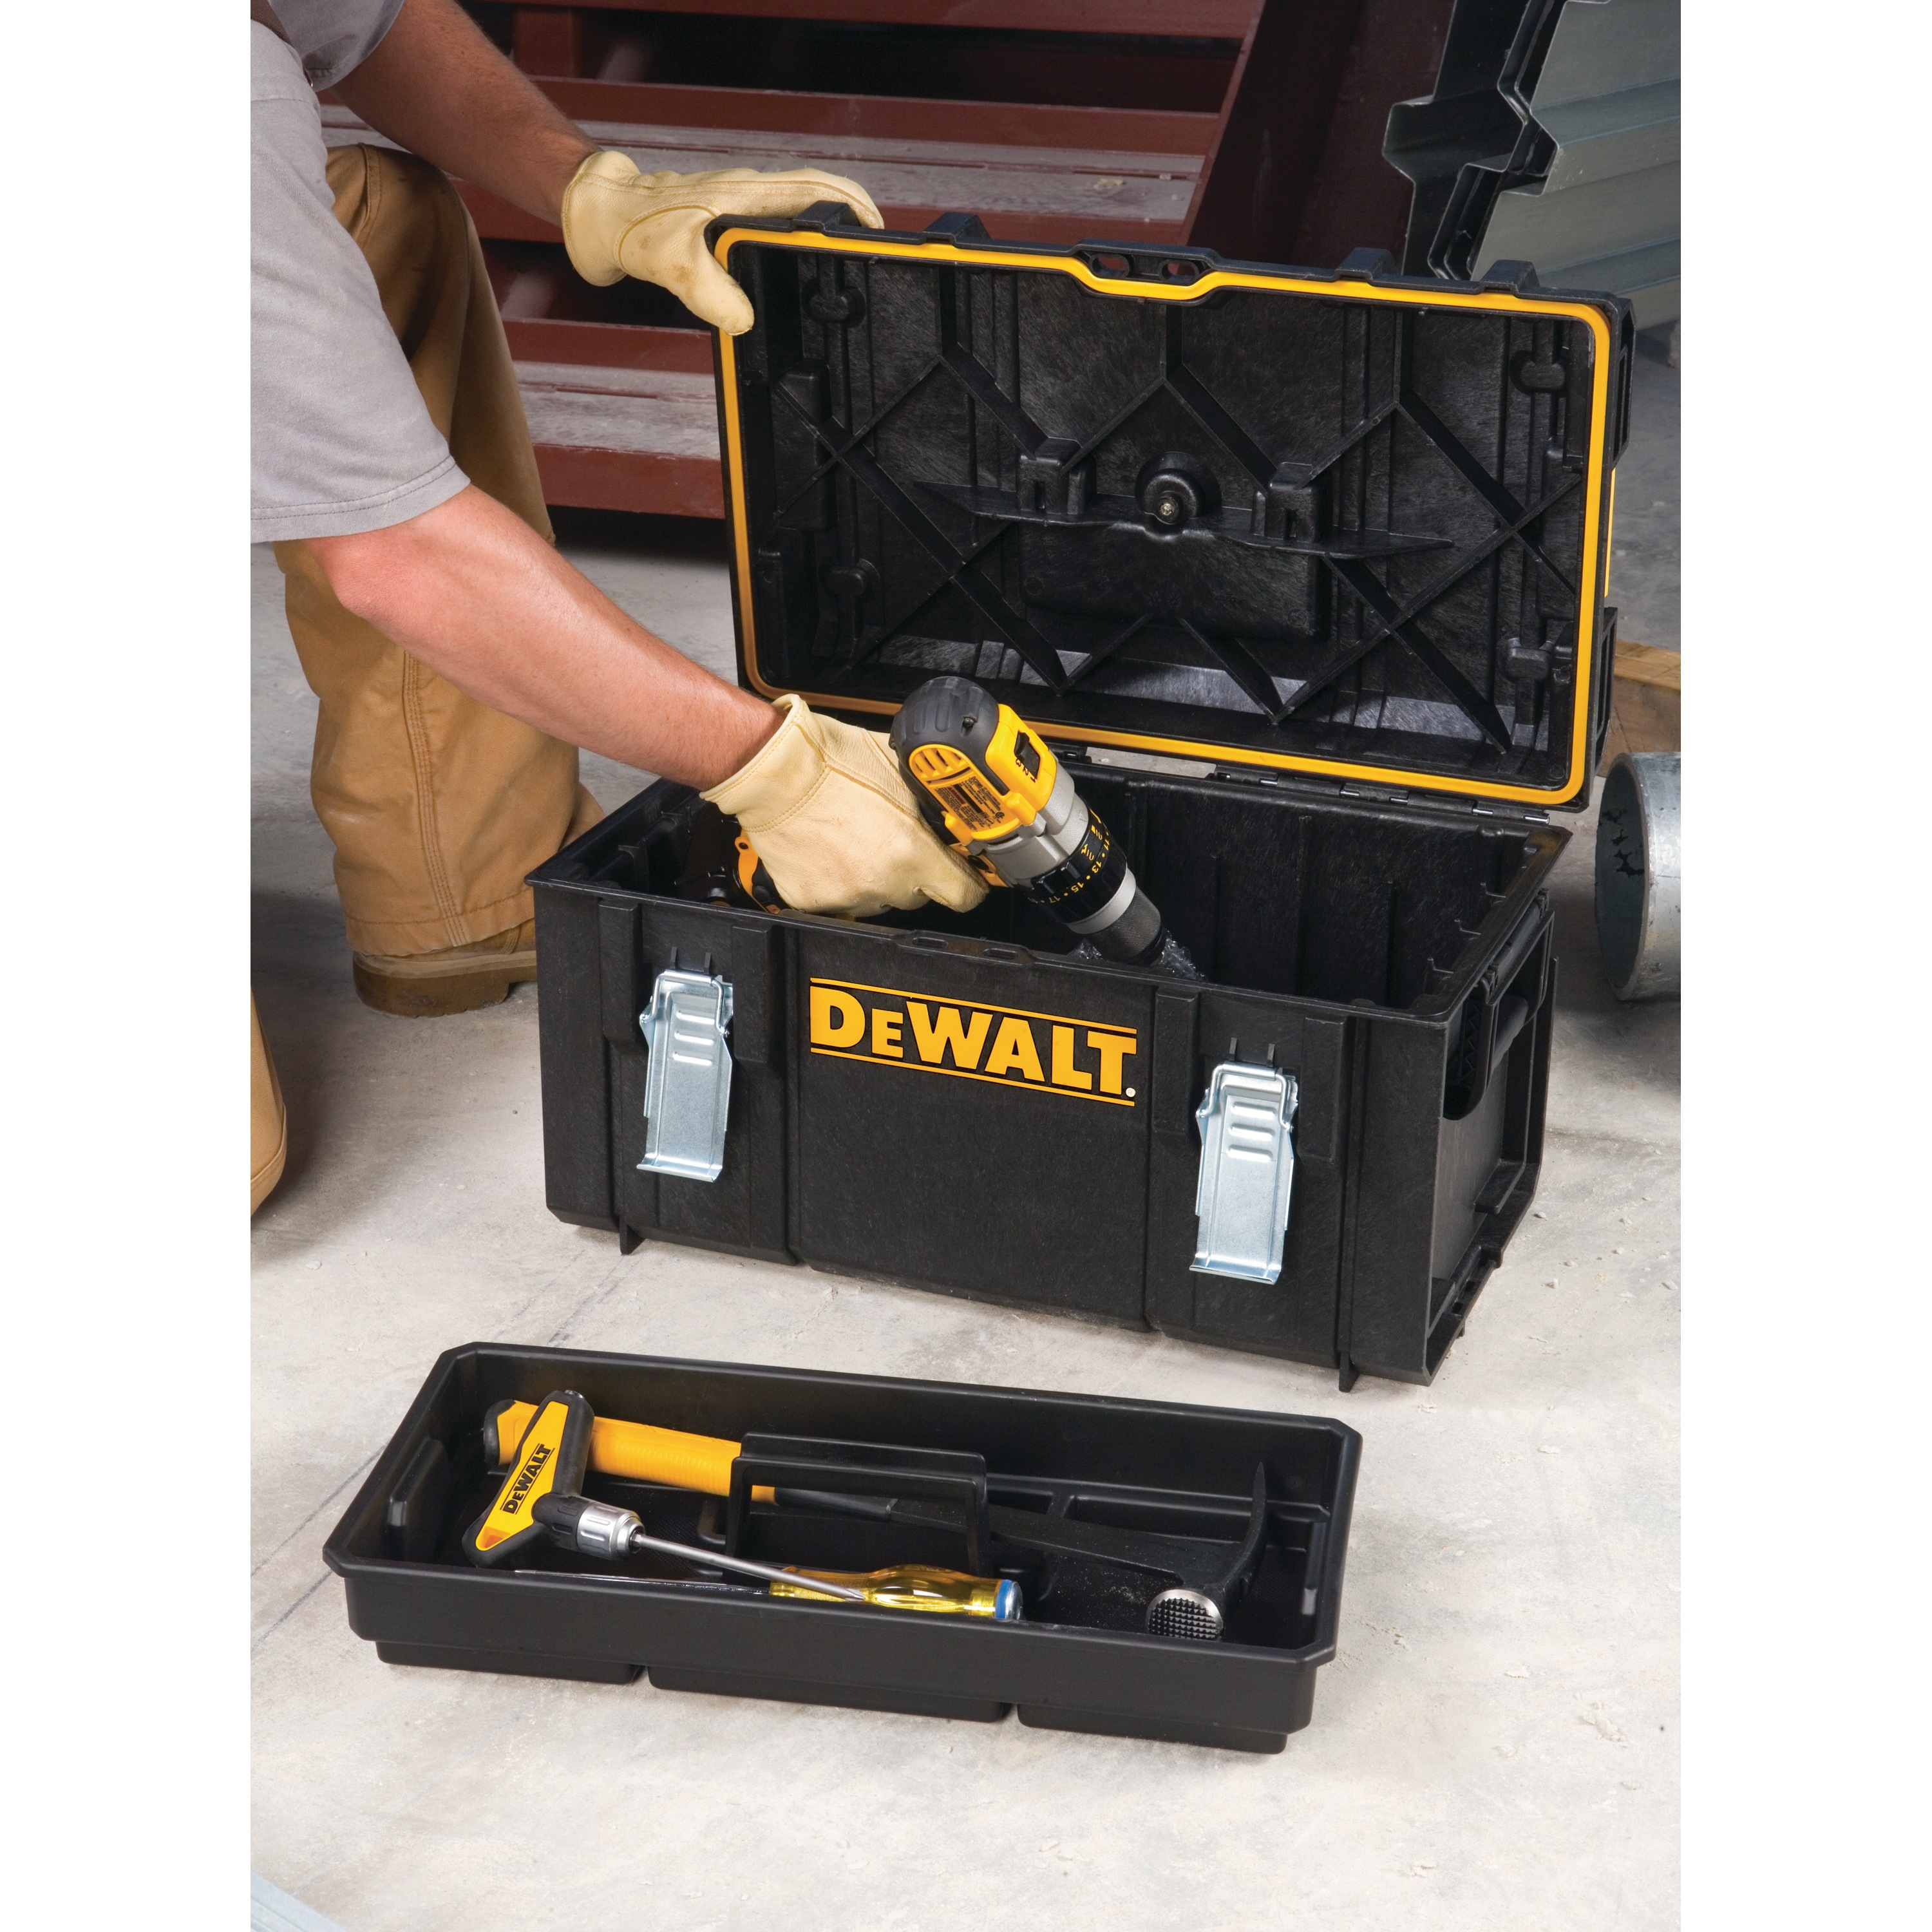 tough system DS 300 large case being used to store drills and other tools.